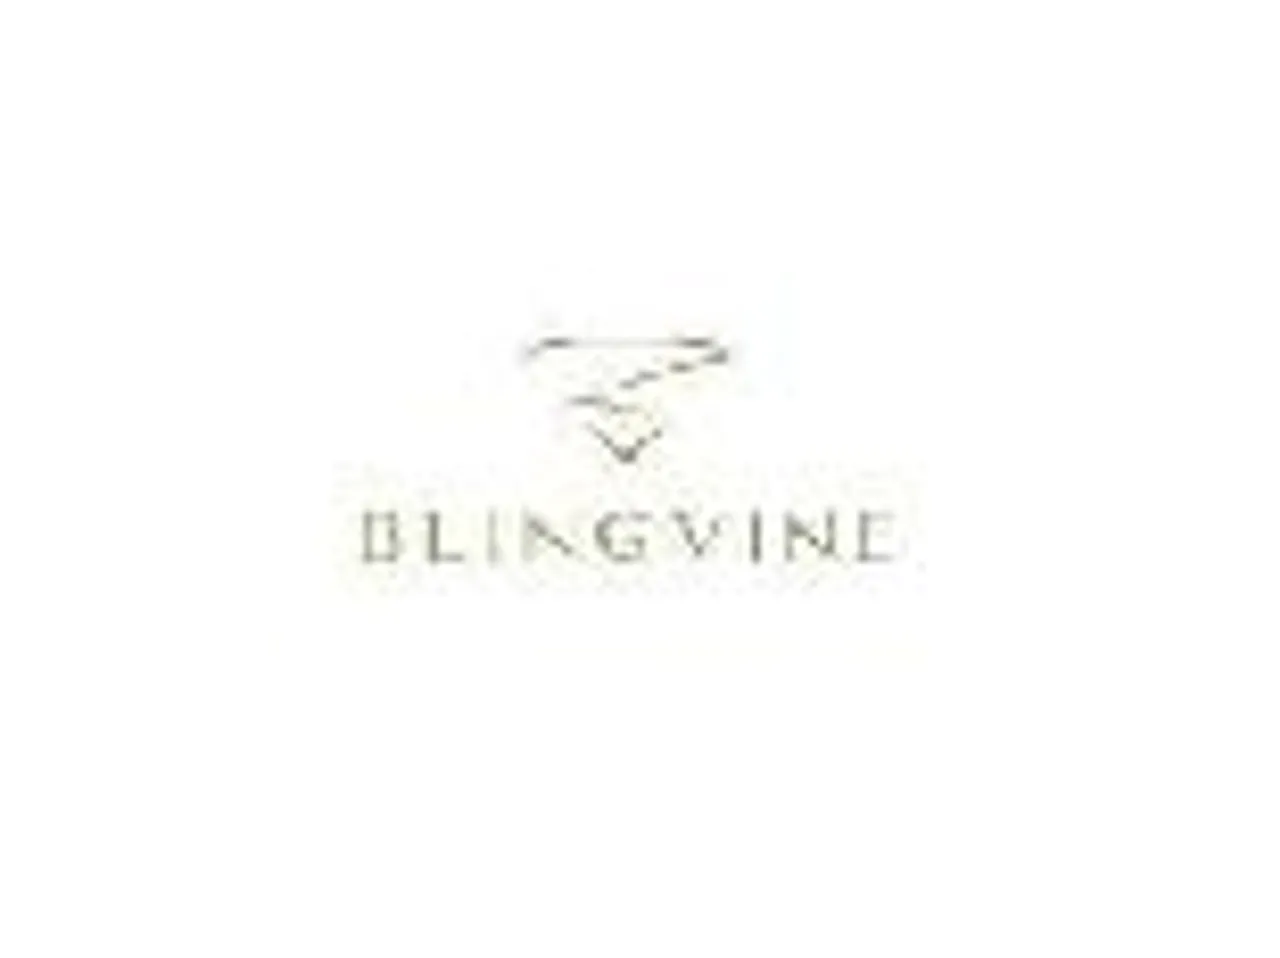 Blingvine Jewellery Launches a Birthday Gift Collection